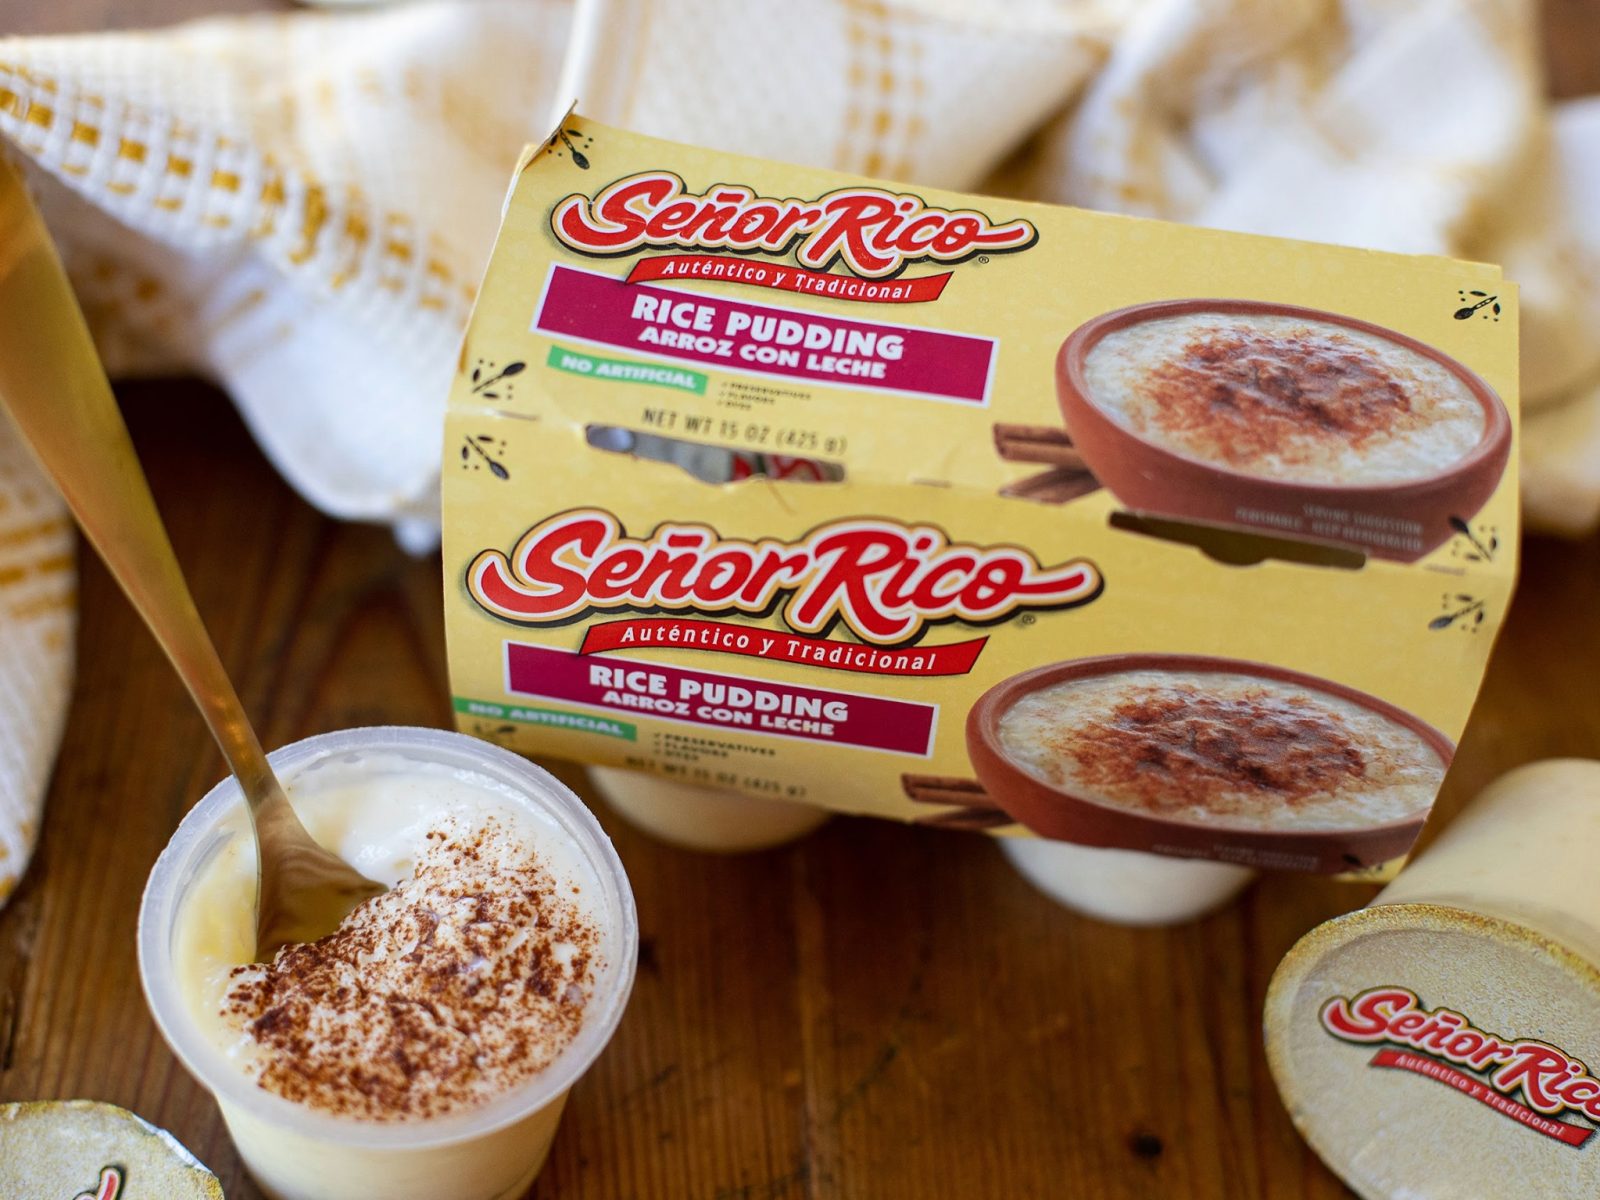 Grab The Packs Of Senor Rico Rice Pudding For Just $1.56 At Publix